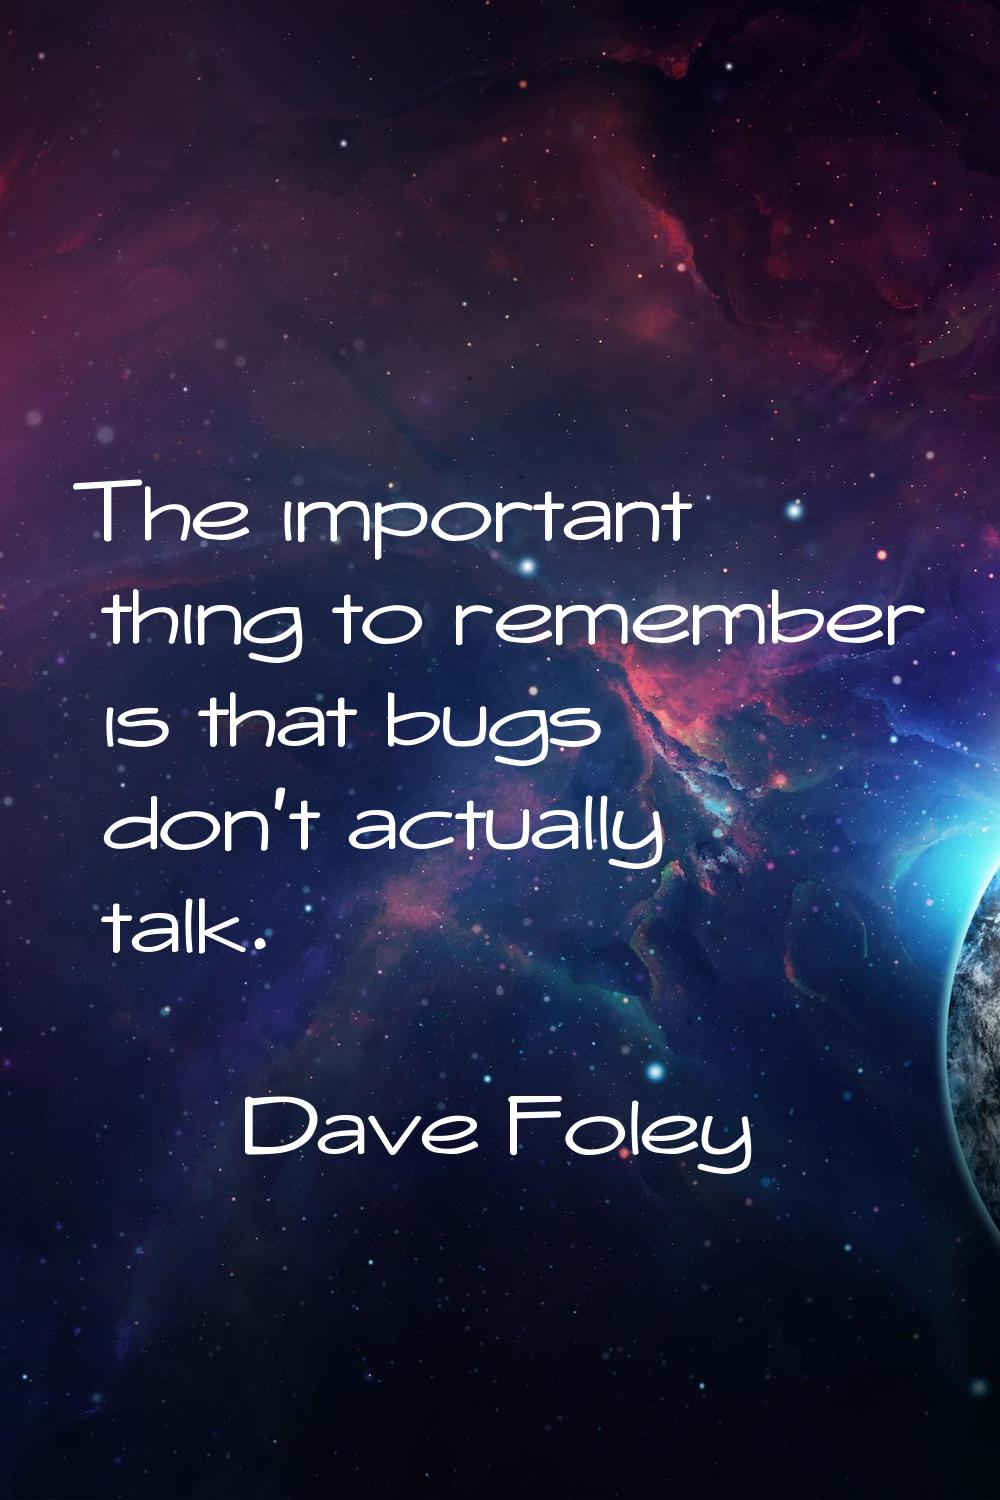 The important thing to remember is that bugs don't actually talk.